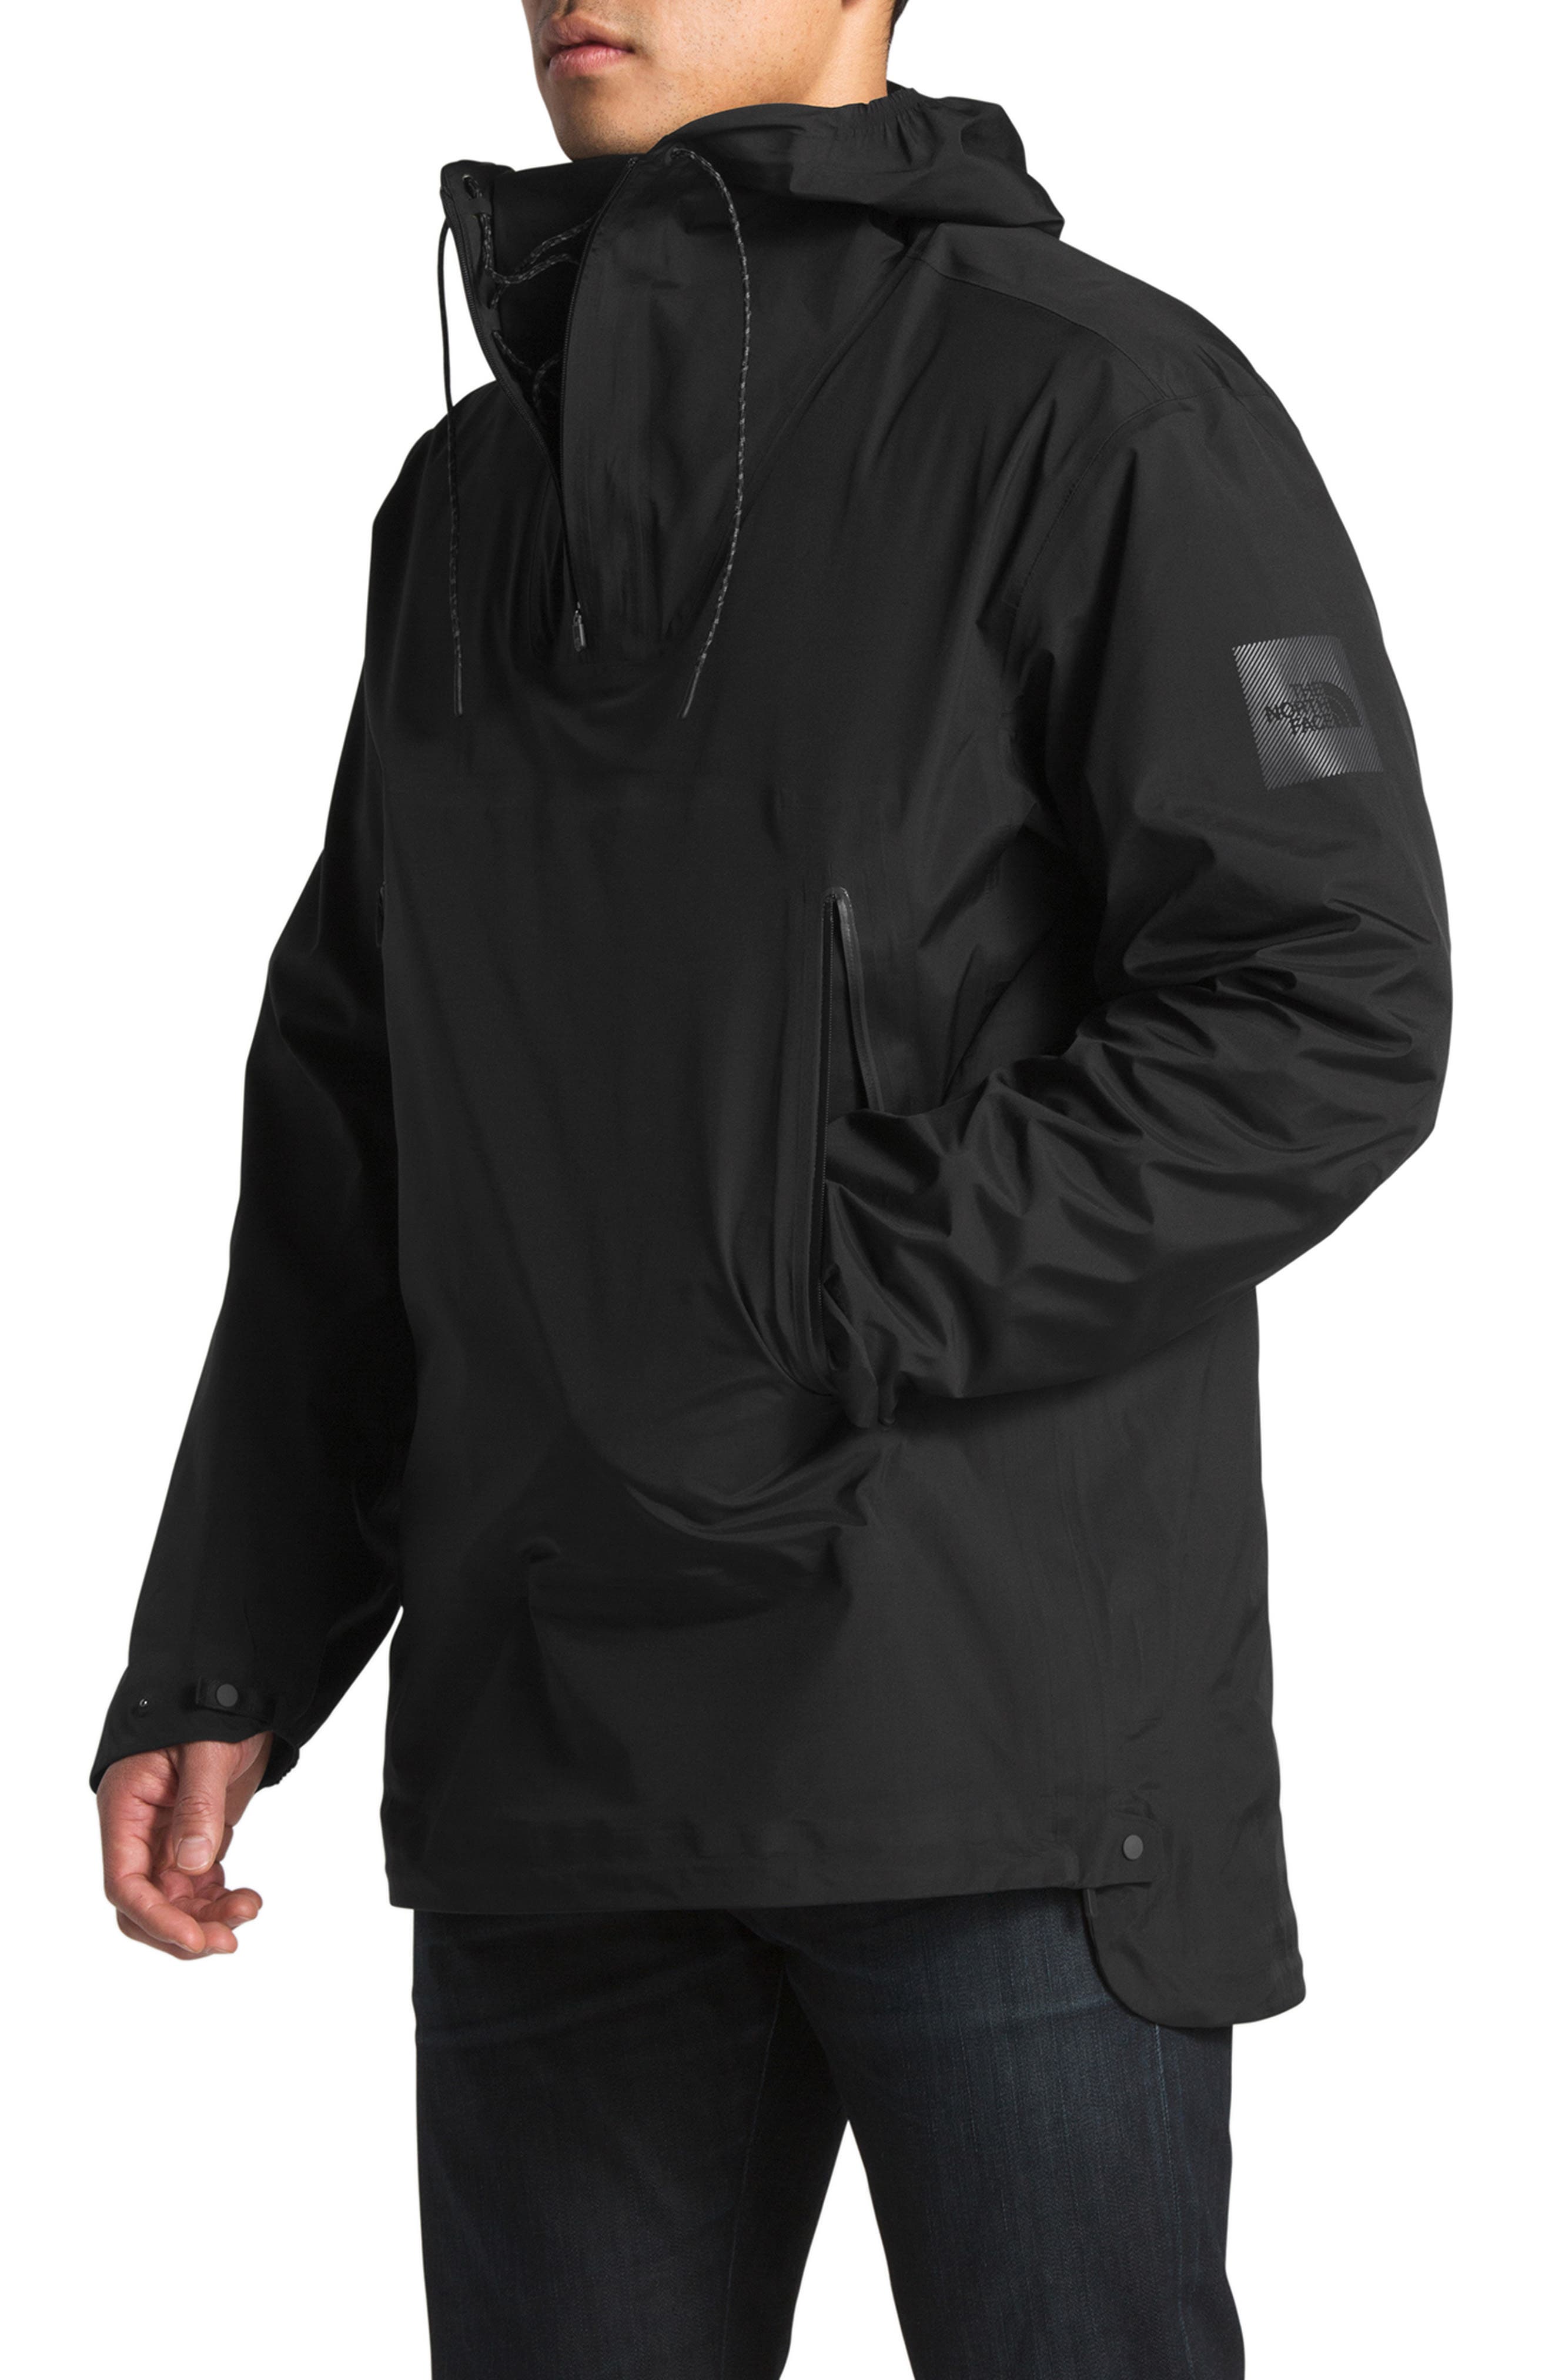 north face cagoule mens